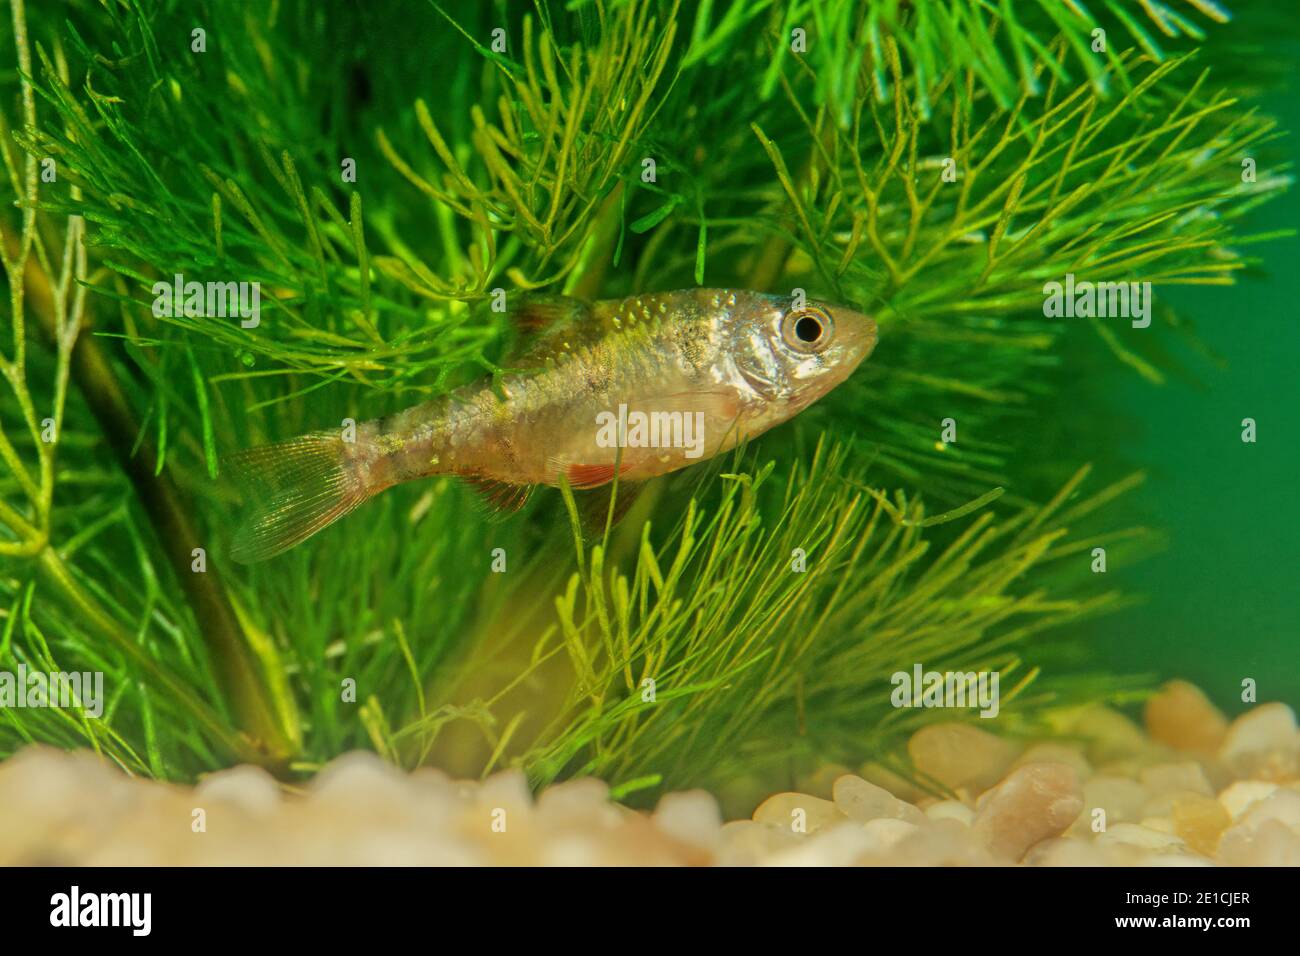 The fiveband barb (Desmopuntius pentazona) is a species of cyprinid freshwater fish from Southeast Asia. Stock Photo